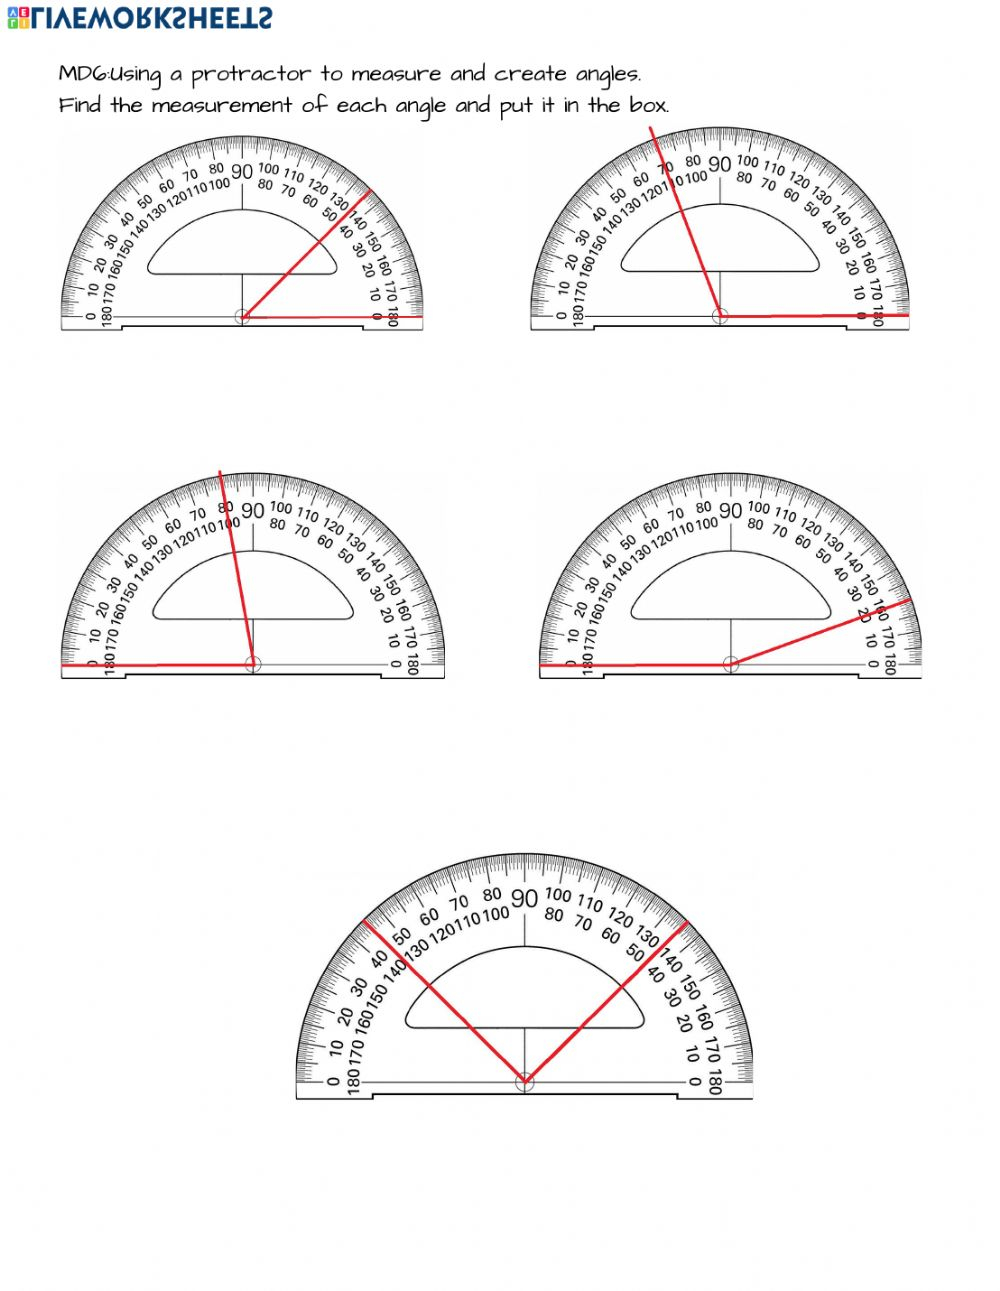 4 MD 6 Measuring Angles With A Protractor Worksheet